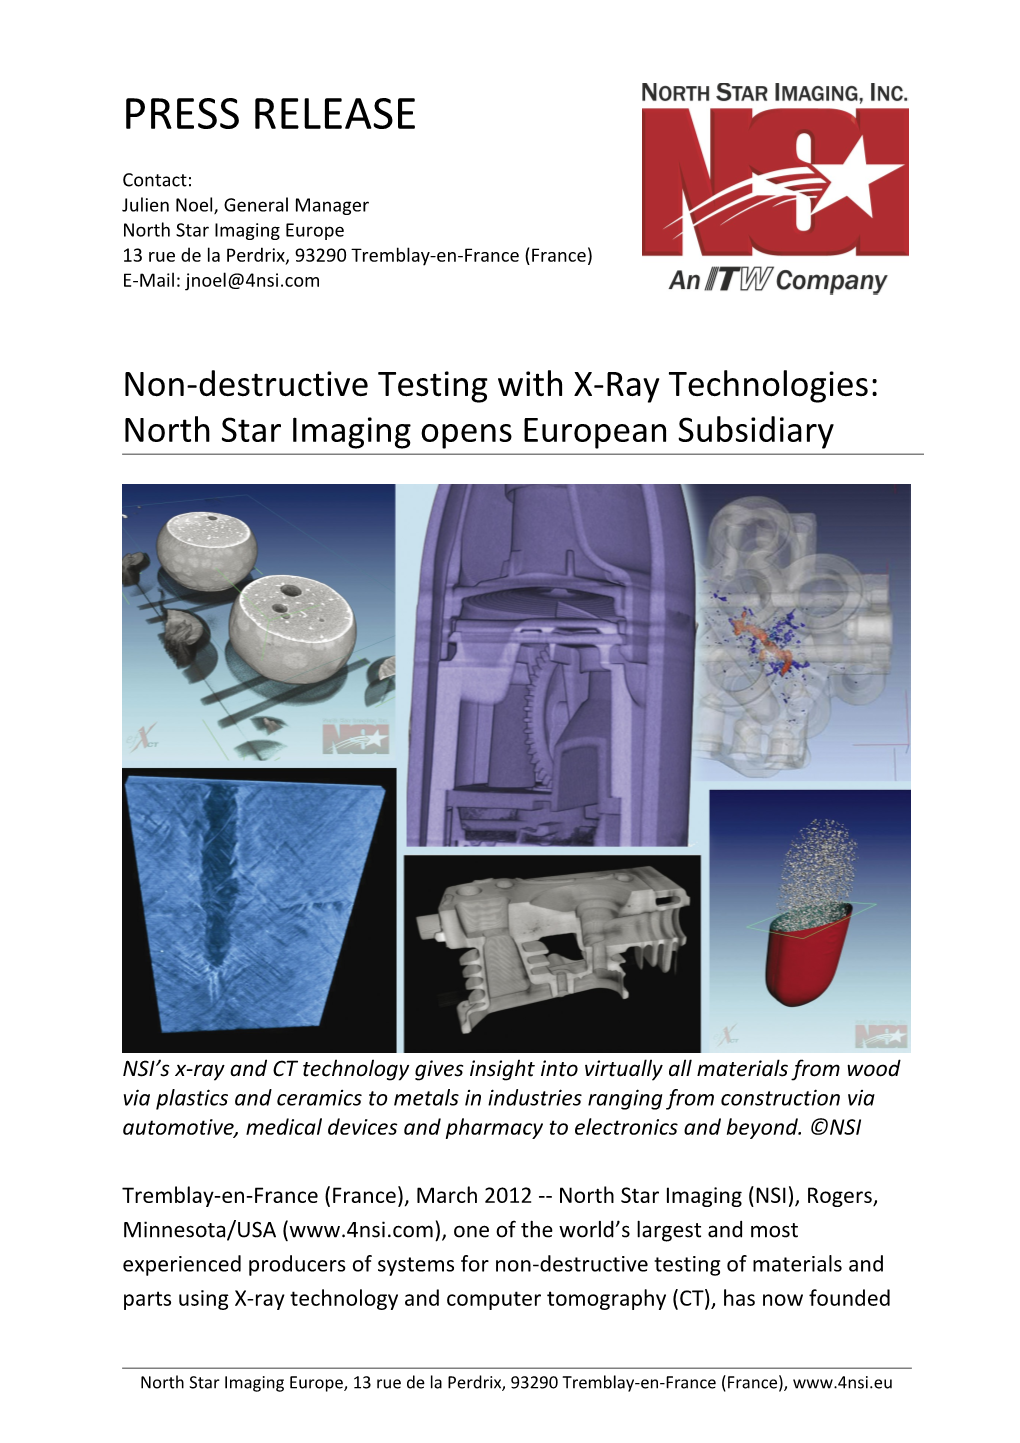 Non-Destructive Testing with X-Ray Technologies